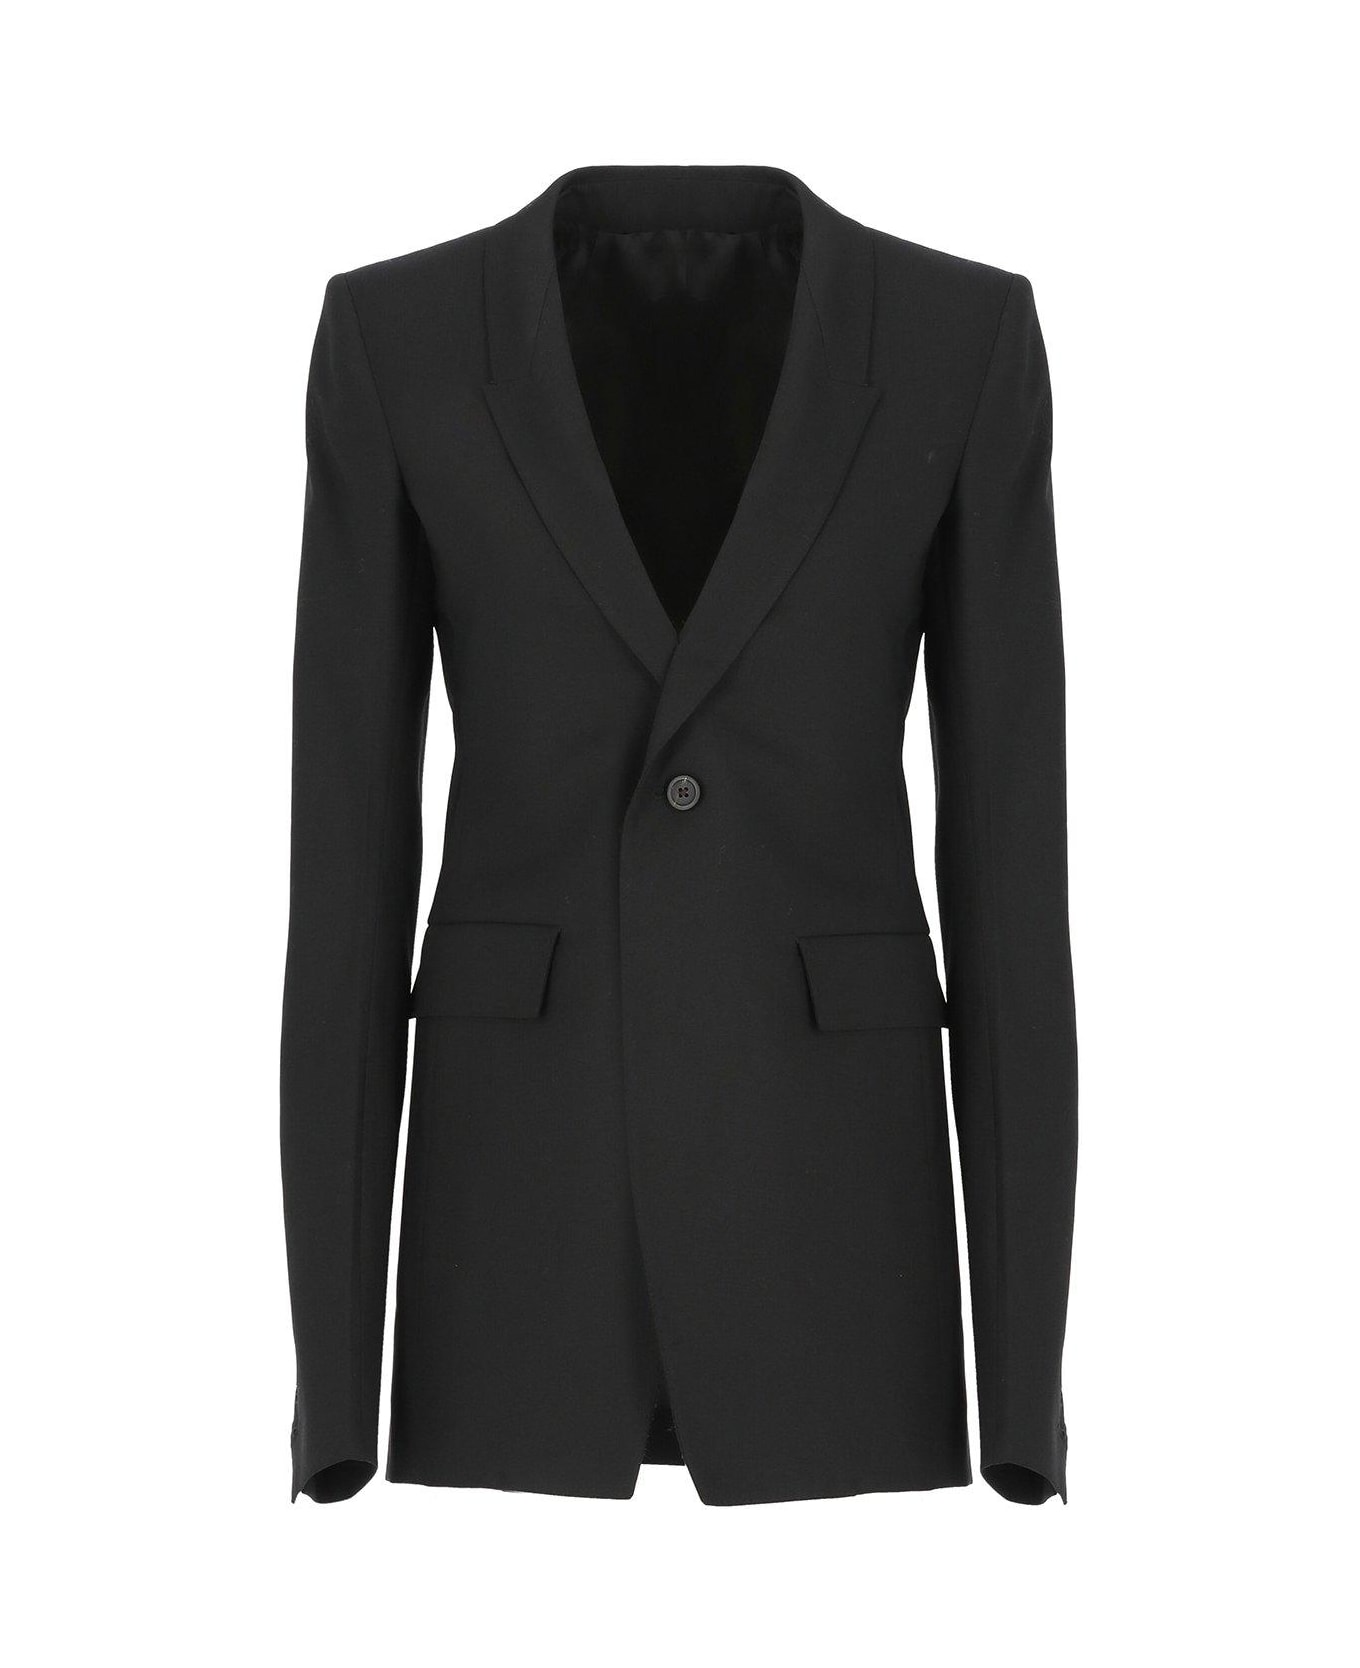 Rick Owens Extreme Single-breasted Tailored Blazer - Black